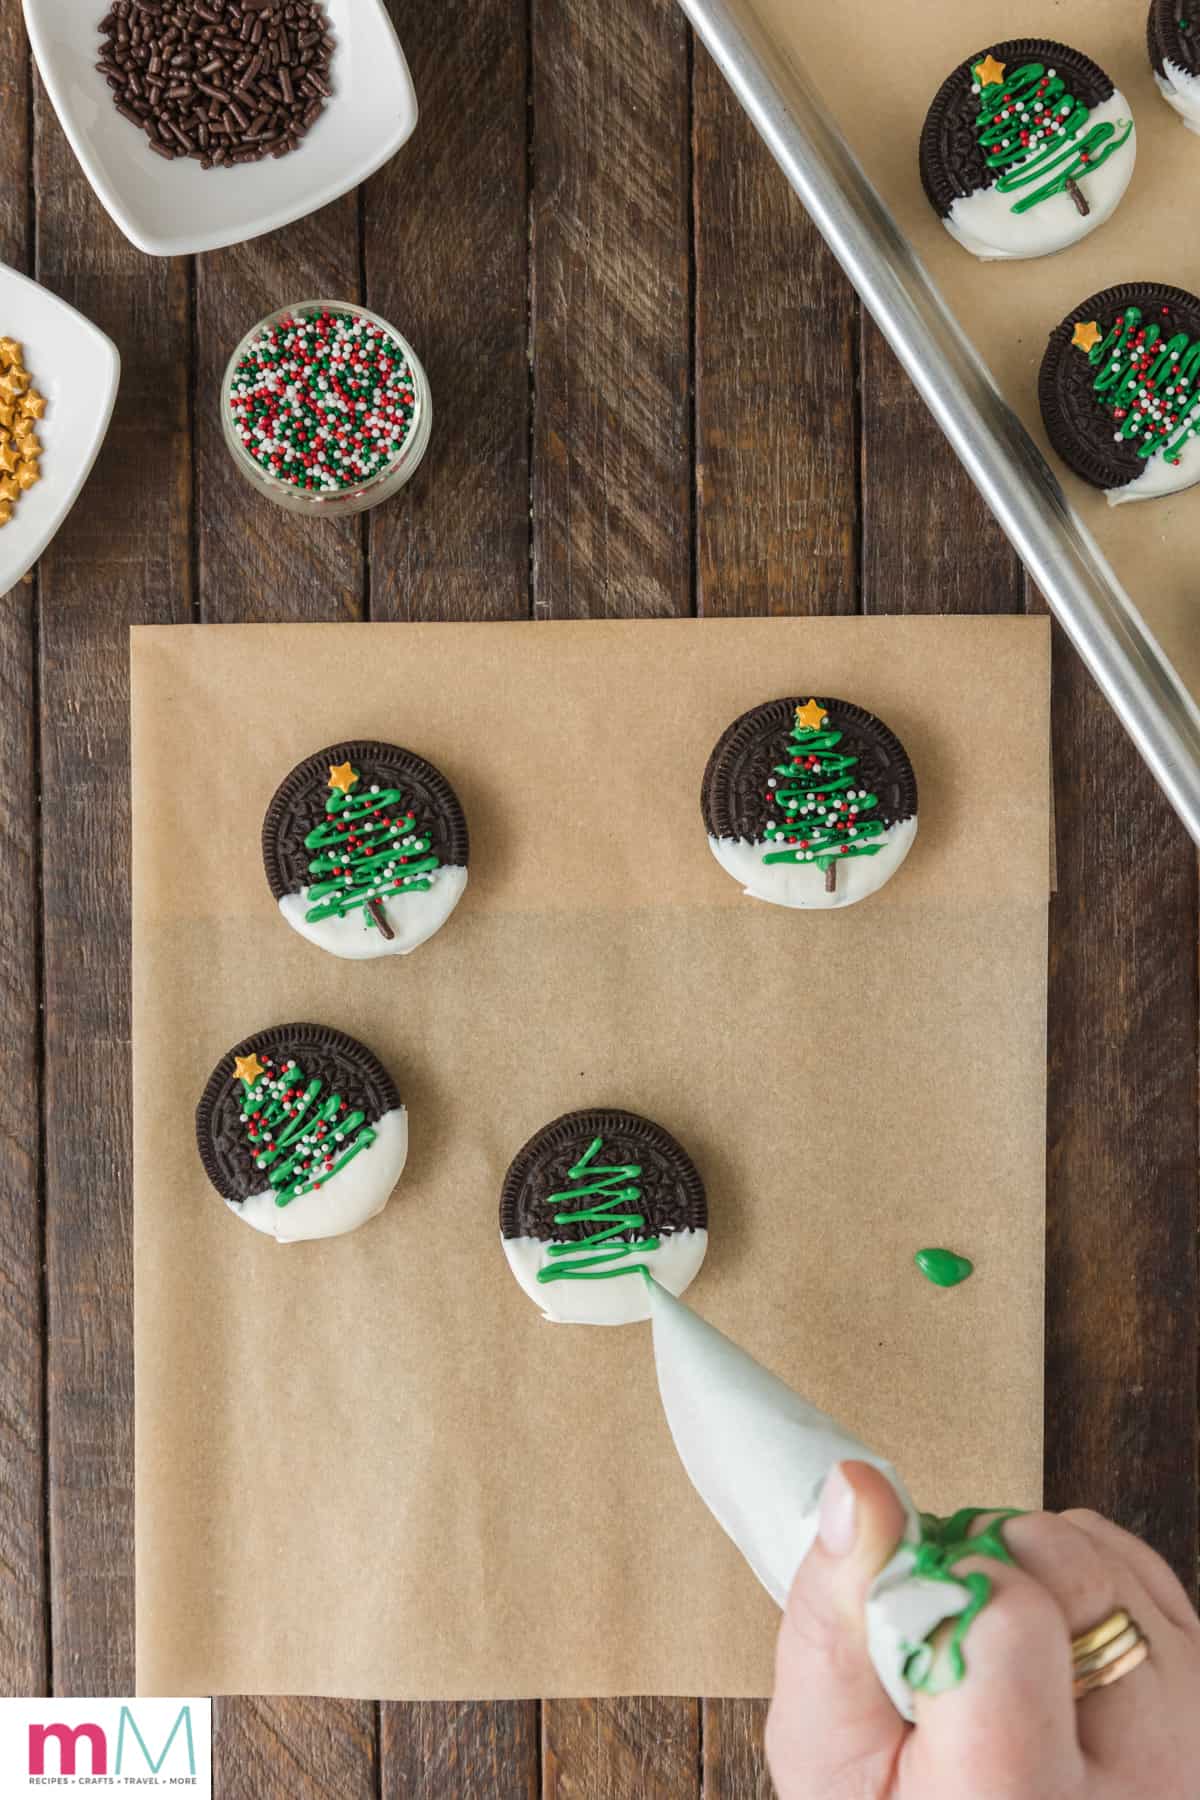 melted chocolate tree being drawn on christmas oreo cookies